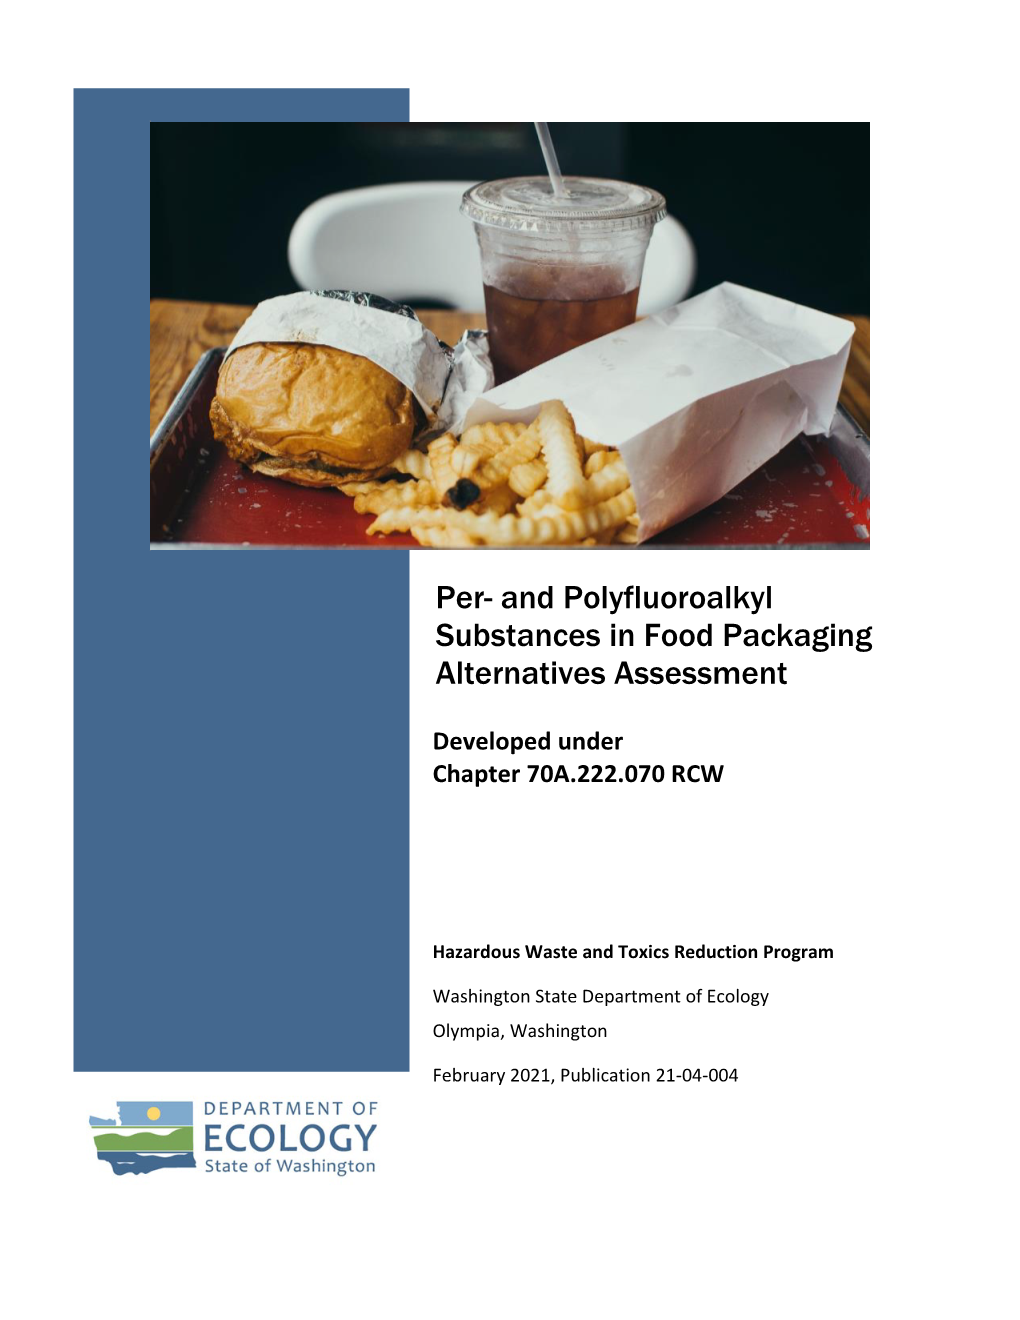 And Polyfluoroalkyl Substances in Food Packaging Alternatives Assessment